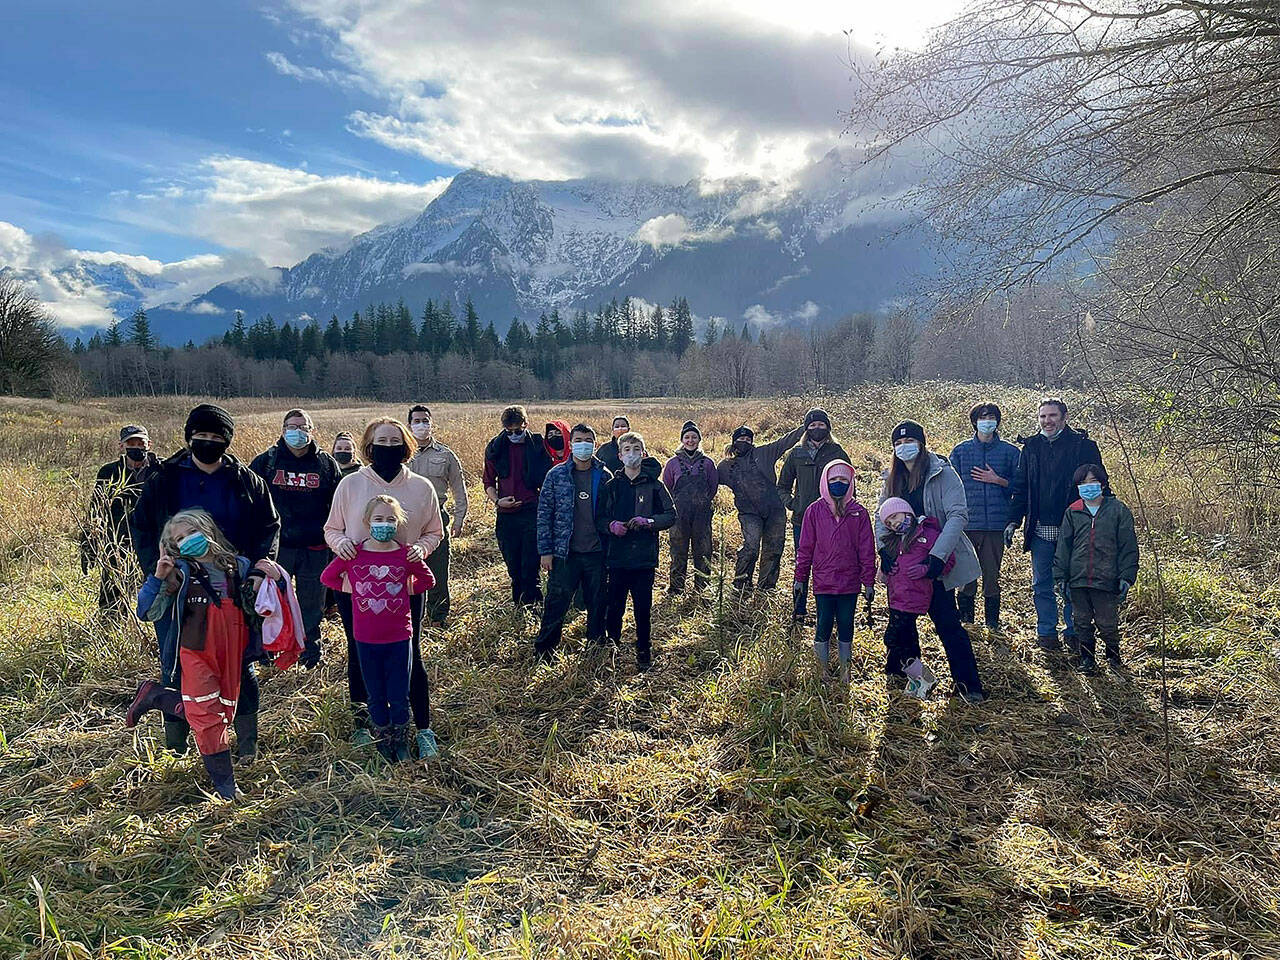 Volunteers from Boy Scout Troop 49 in Lynnwood and Girl Scout Troop 21286 in Lake Stevens helped Sound Salmon Solutions plant 357 native trees and plants along Segelson Creek and the North Fork Stillaguamish River near Darrington on Nov. 20. (Sound Salmon Solutions)